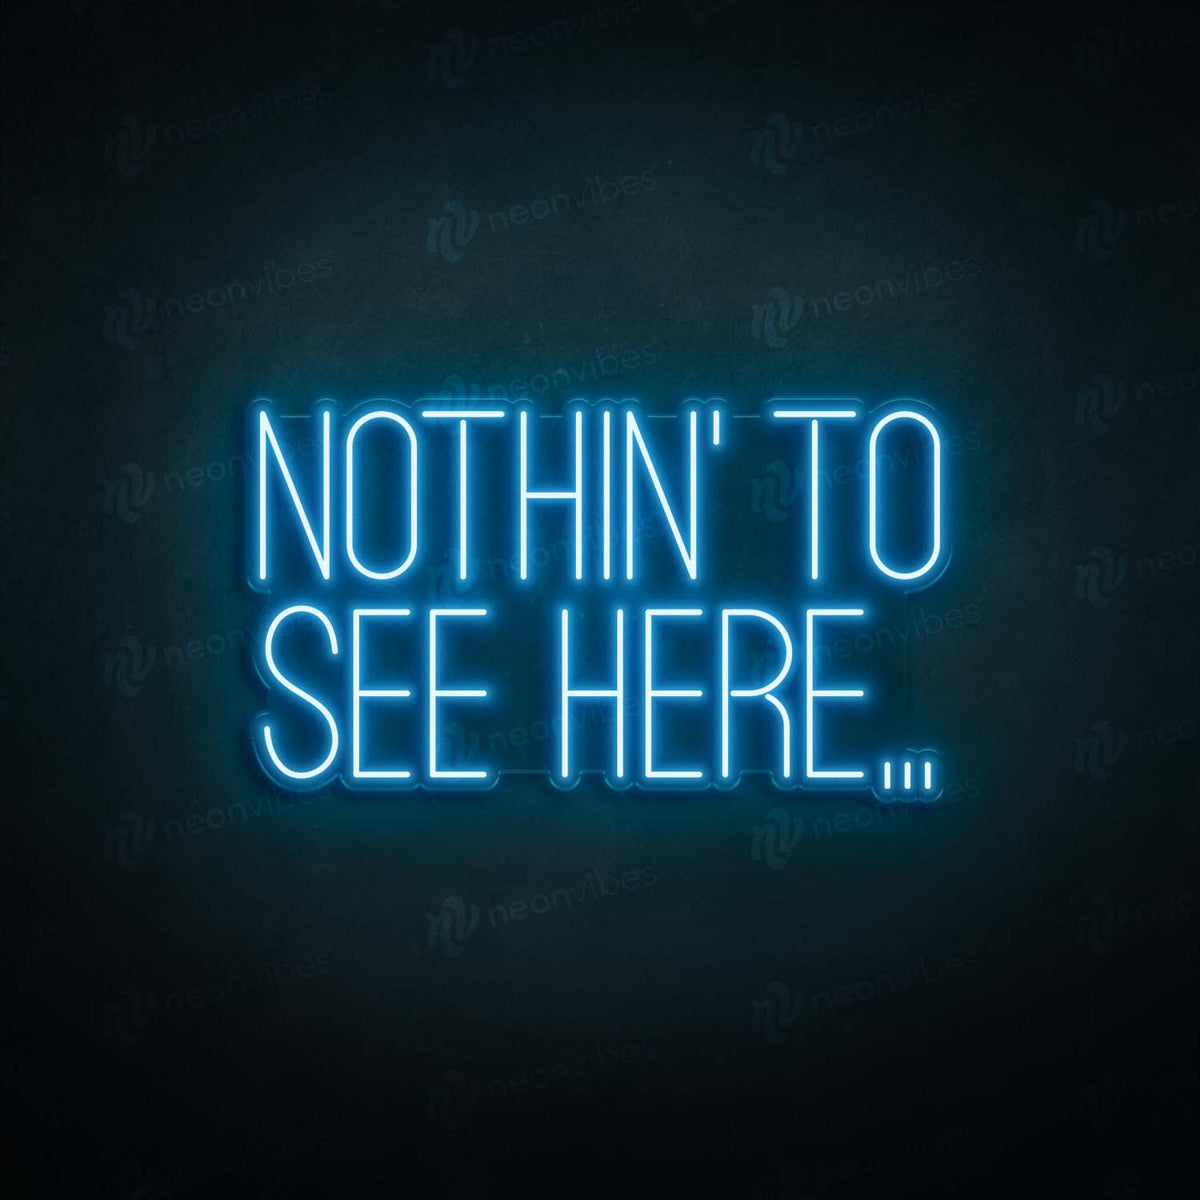 Nothing to see here neon sign